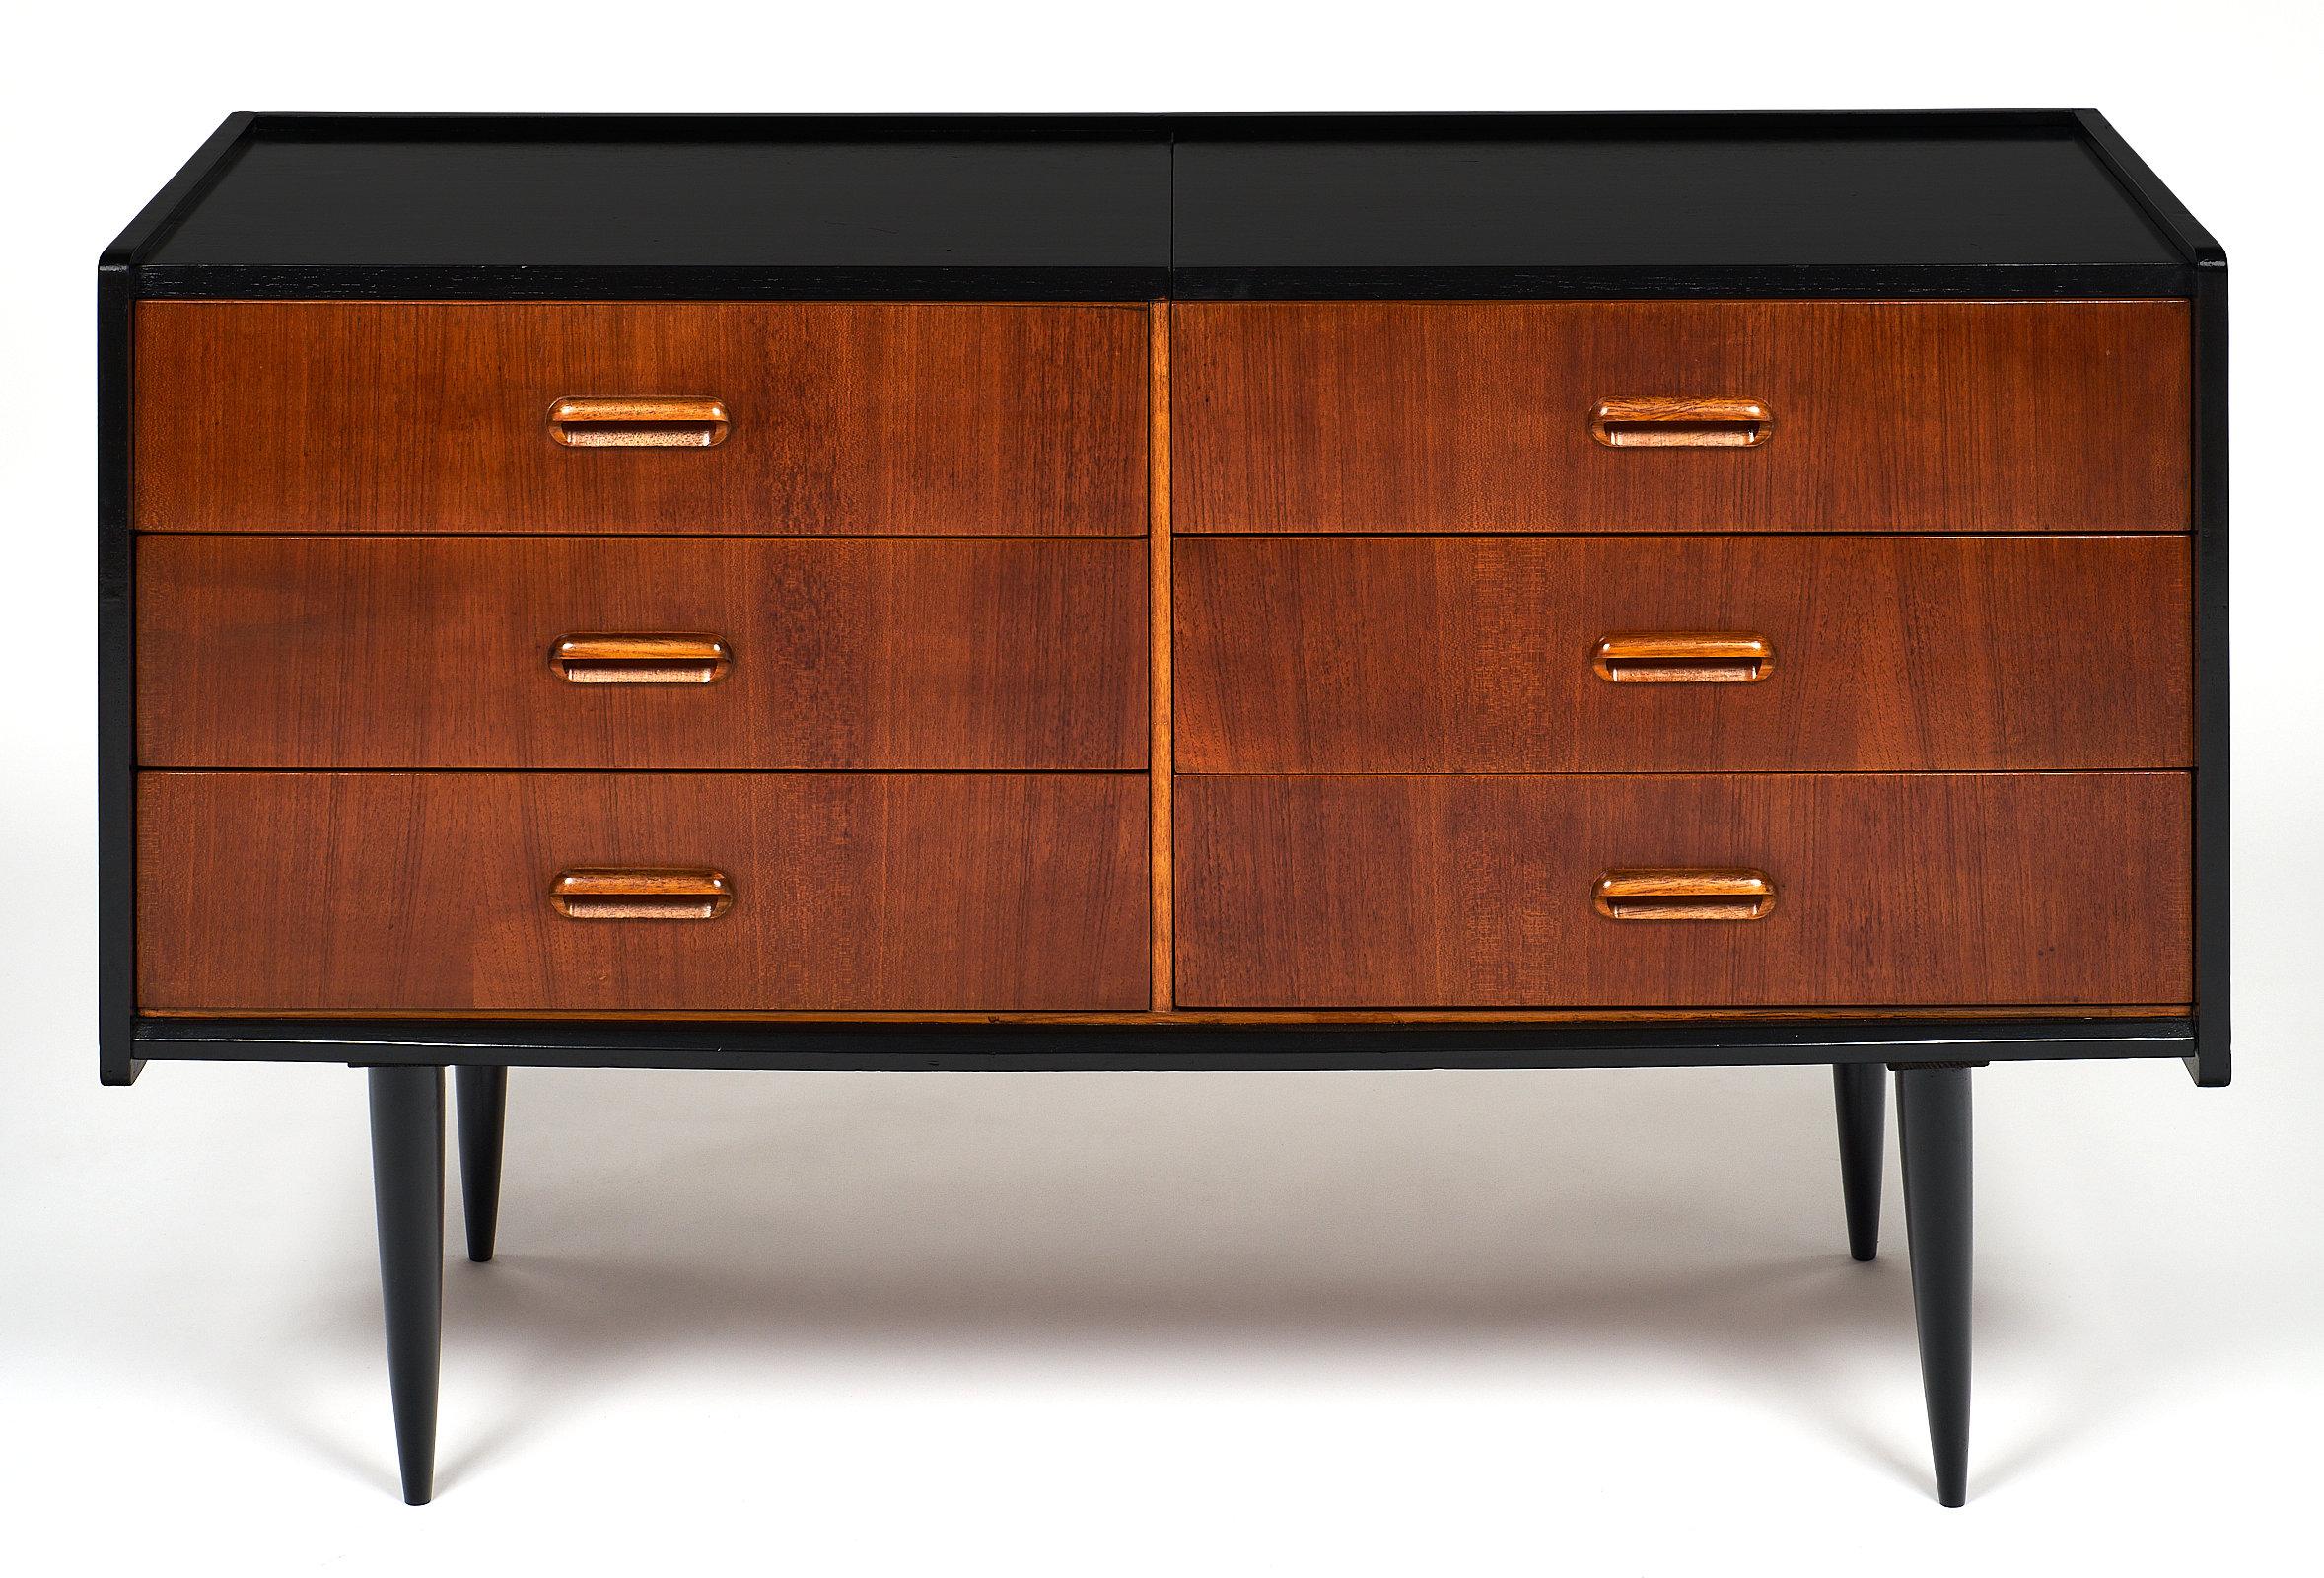 A fine Mid-Century Modern Danish chest with six drawers, one of which is a drop front. We loved the perfect proportions, teak wood, and satin finish. The base and top have been ebonized for a striking contrast.